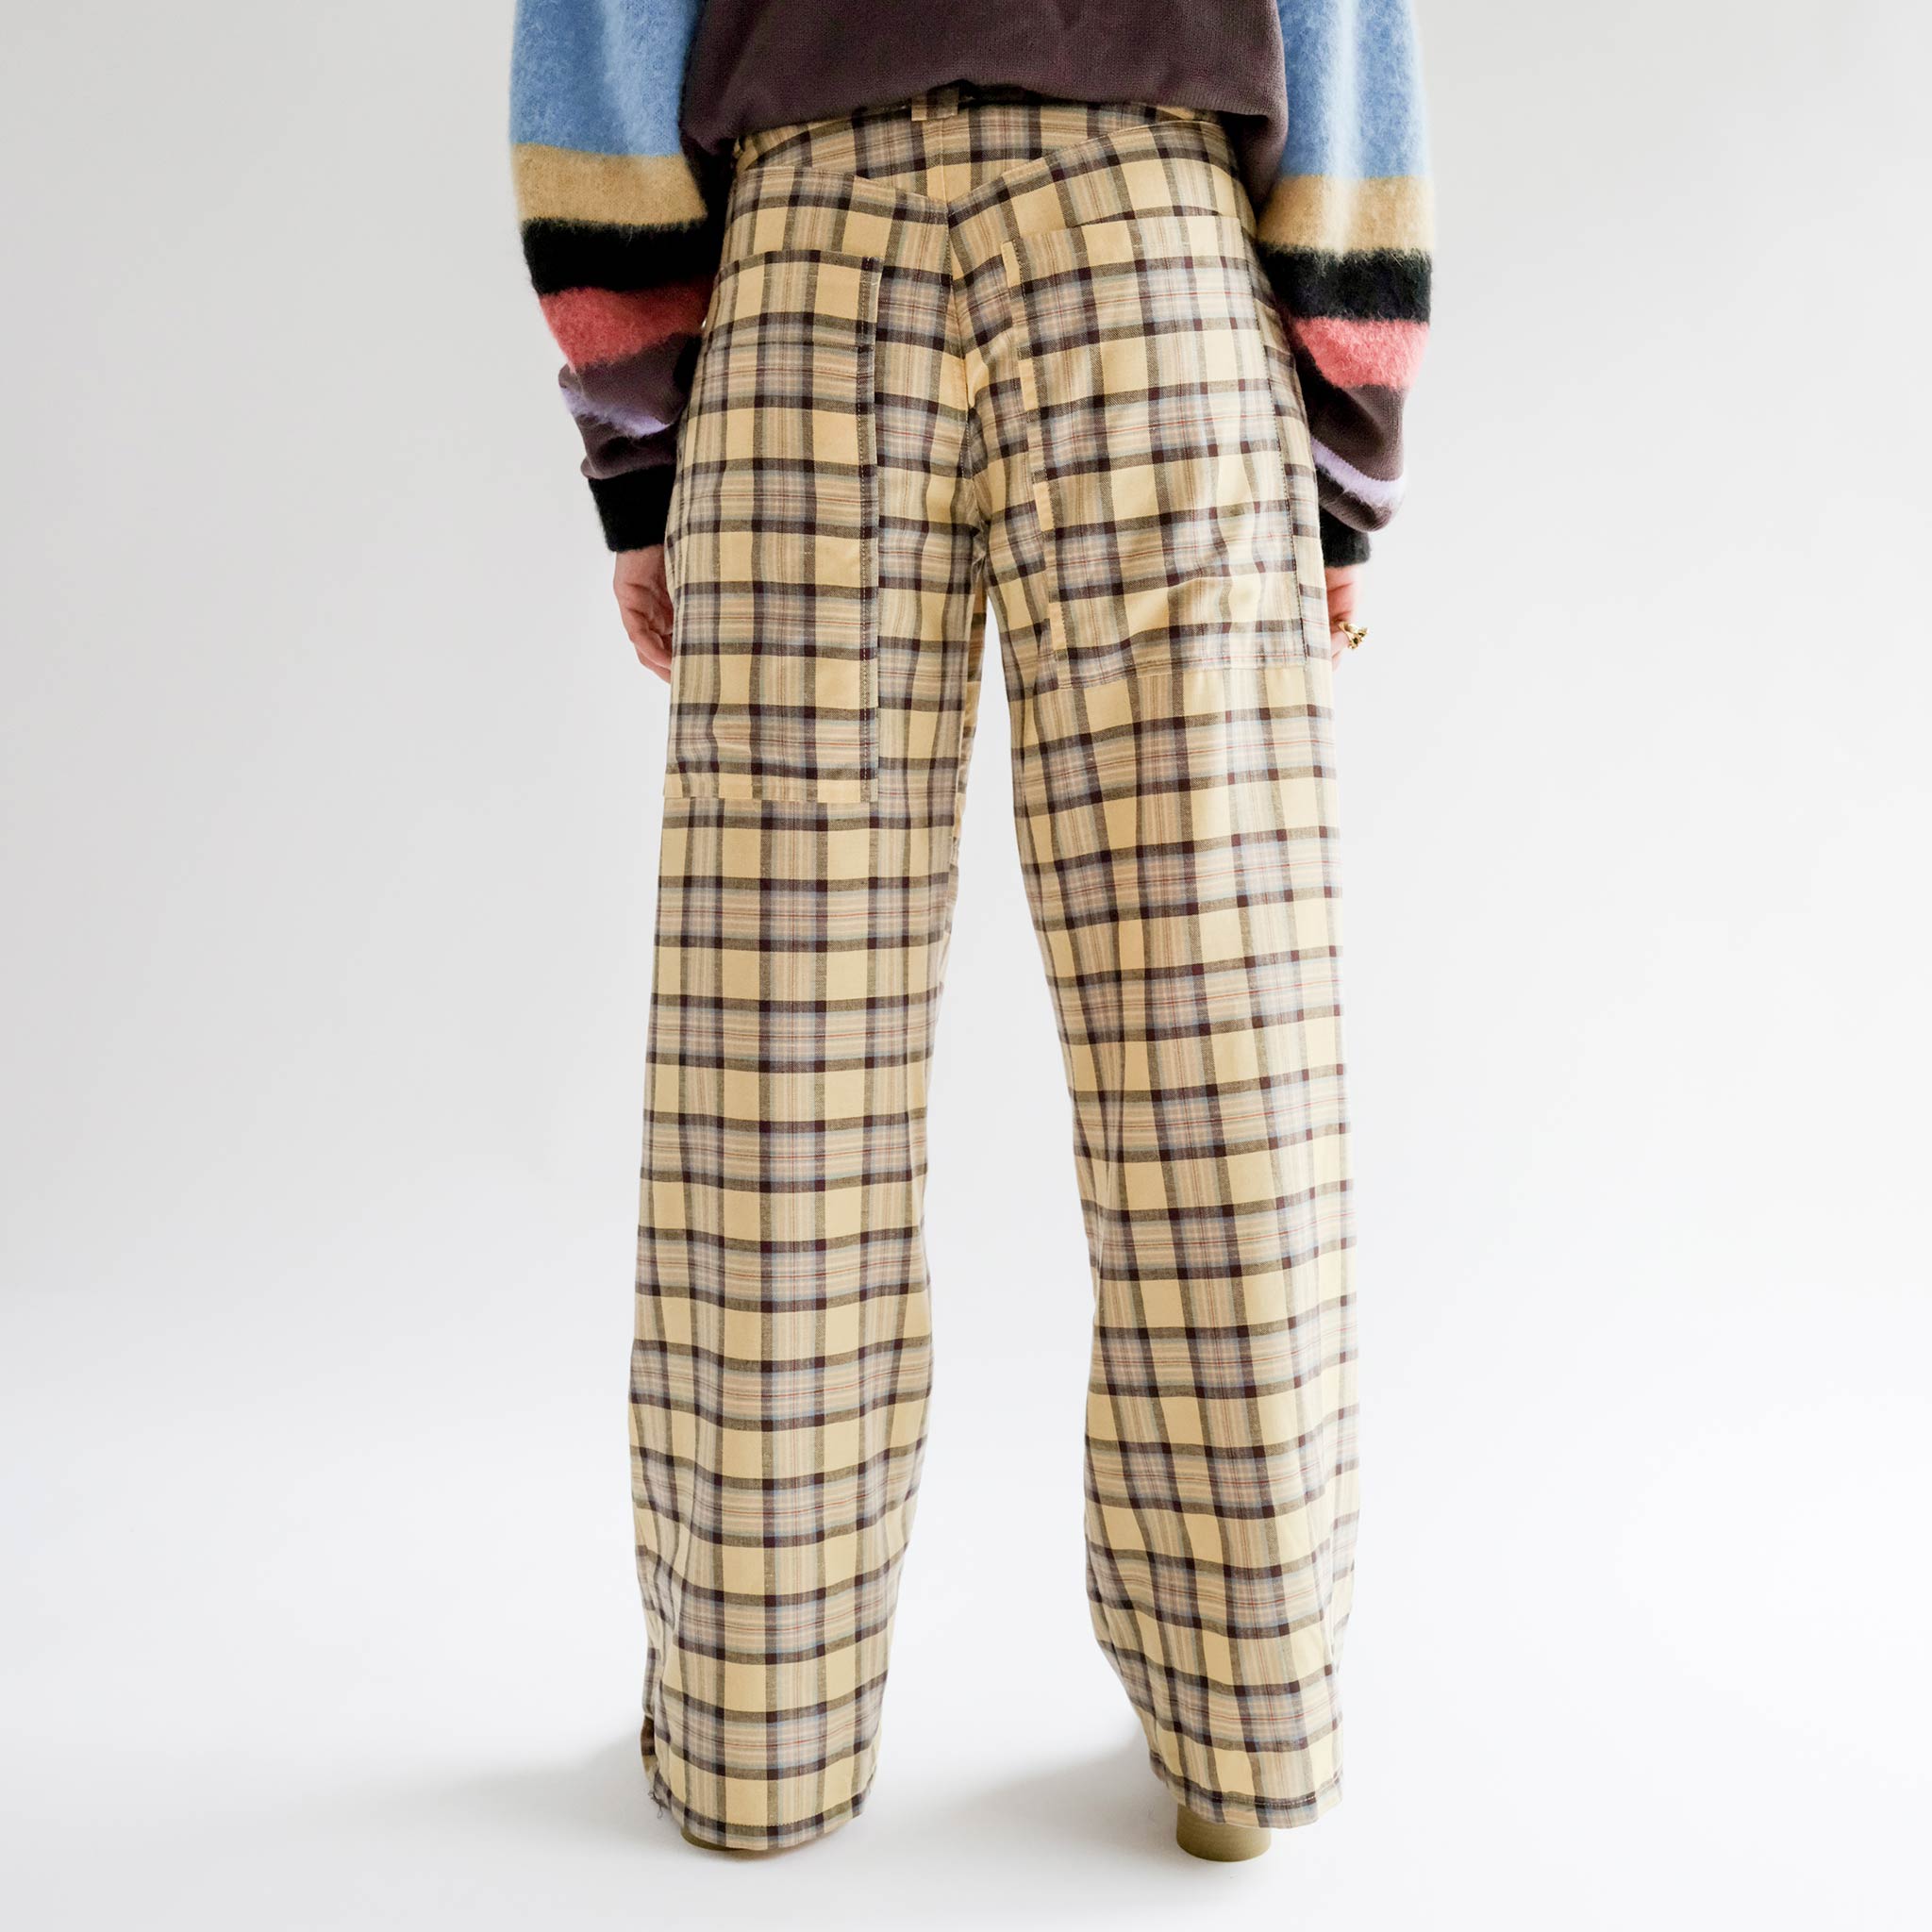 Half body photo of model wearing the Lawn Pant - Mall Plaid.